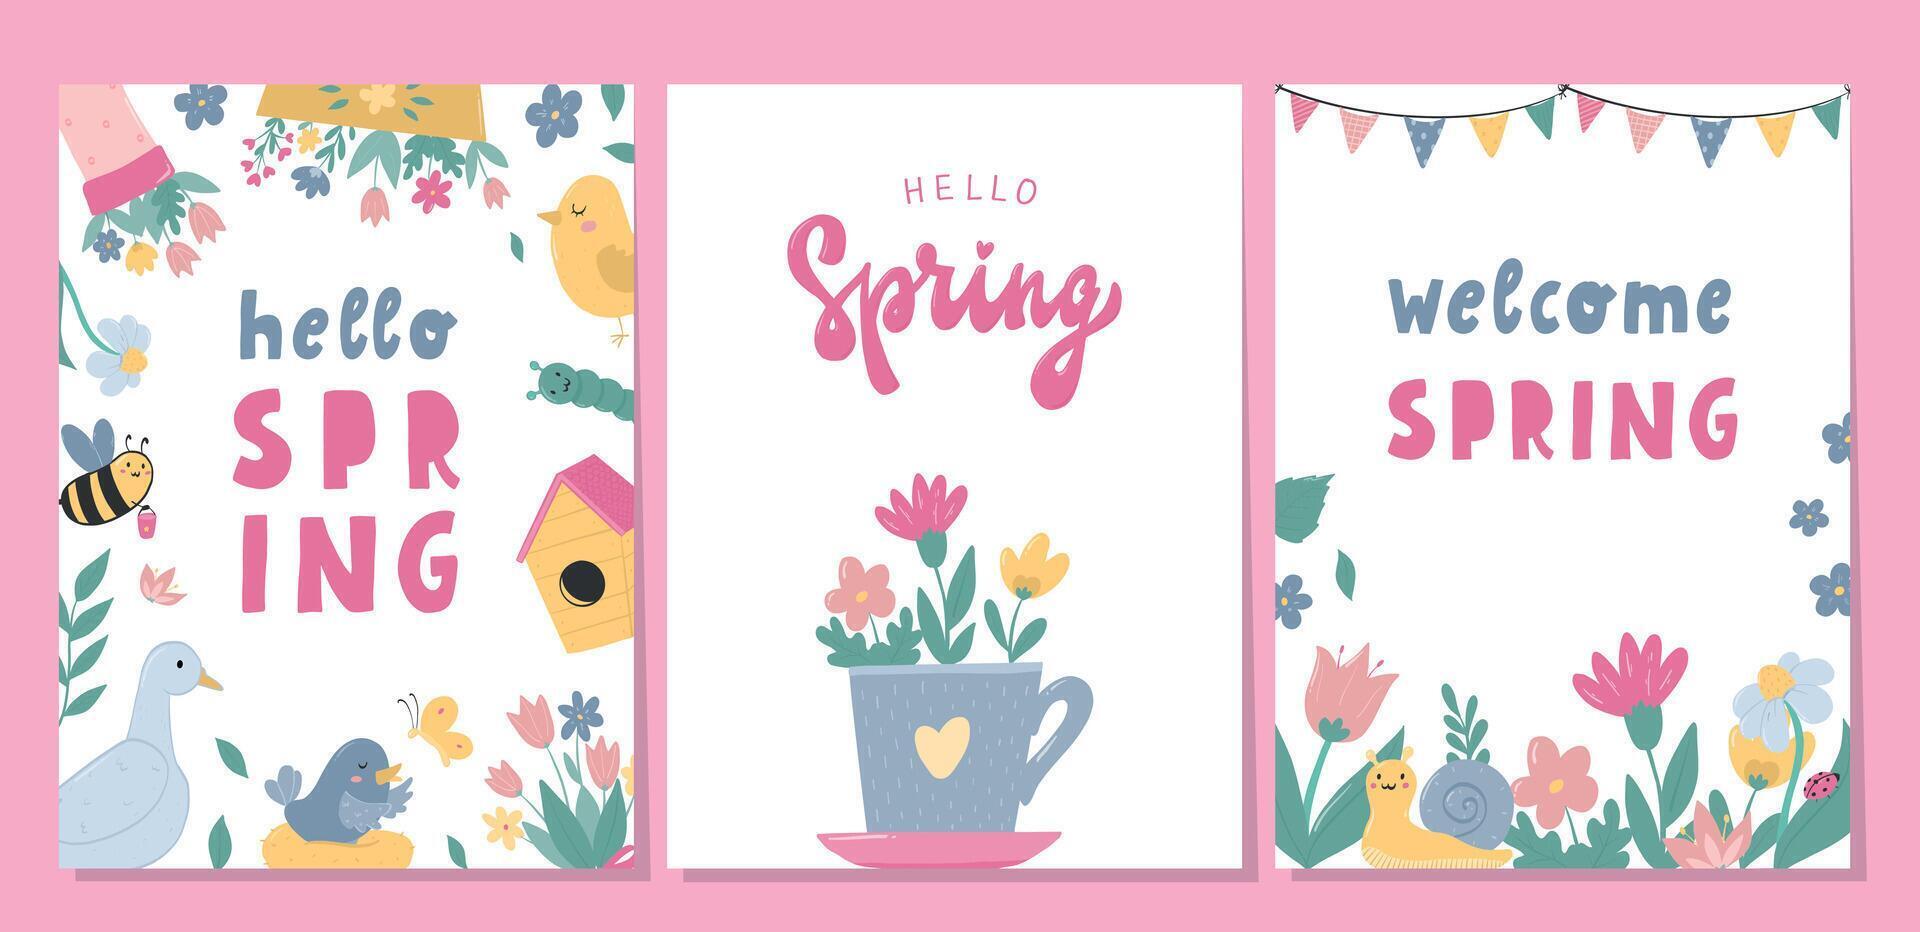 Spring cards, posters, prints, invitations with doodles and lettering quotes. Spring flowers, cartoon elements, templates, etc. EPS 10 vector